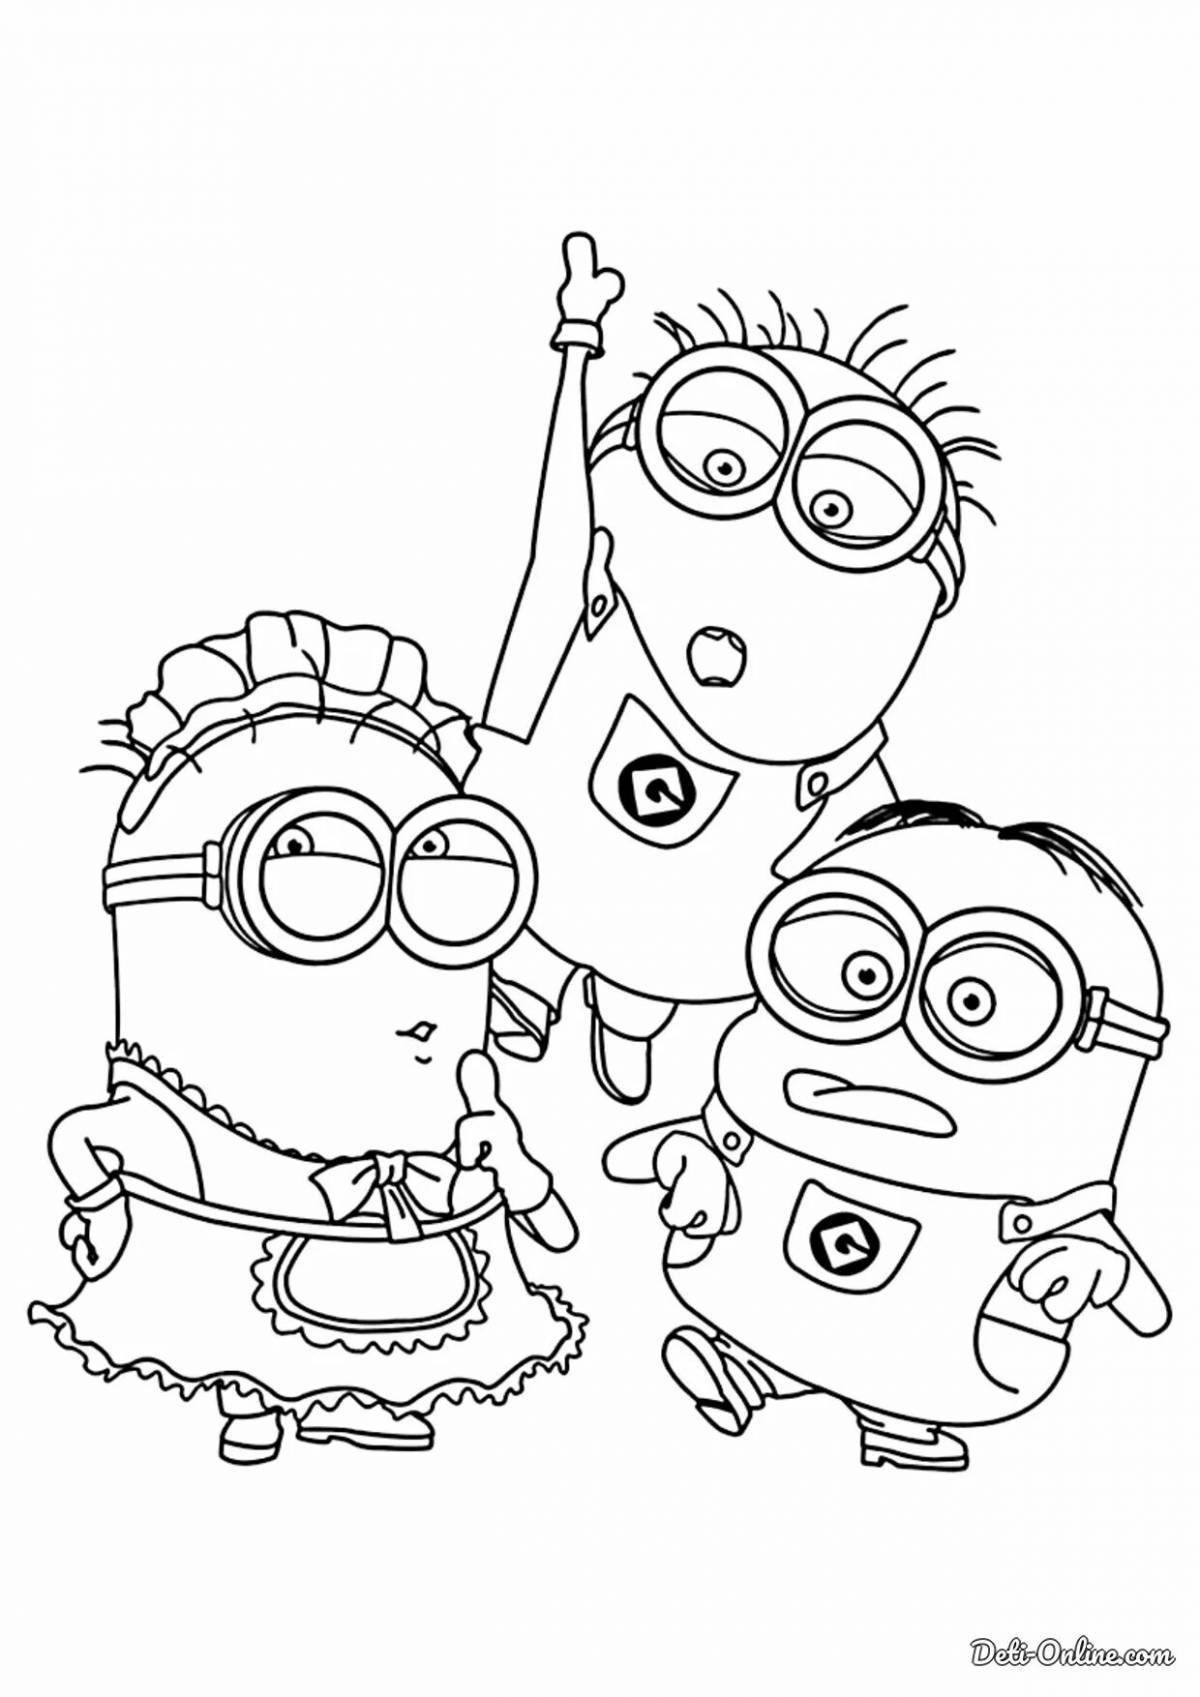 Minion coloring page for kids